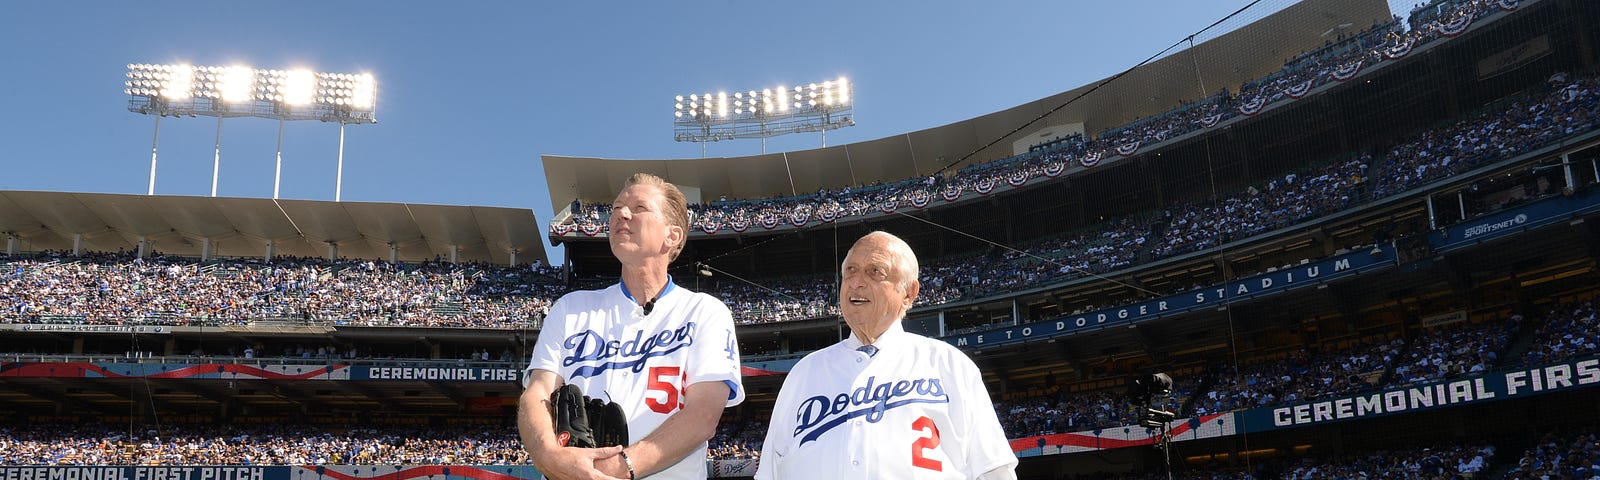 Dodgers past and present share memories and condolences after Tommy  Lasorda's passing, by Rowan Kavner